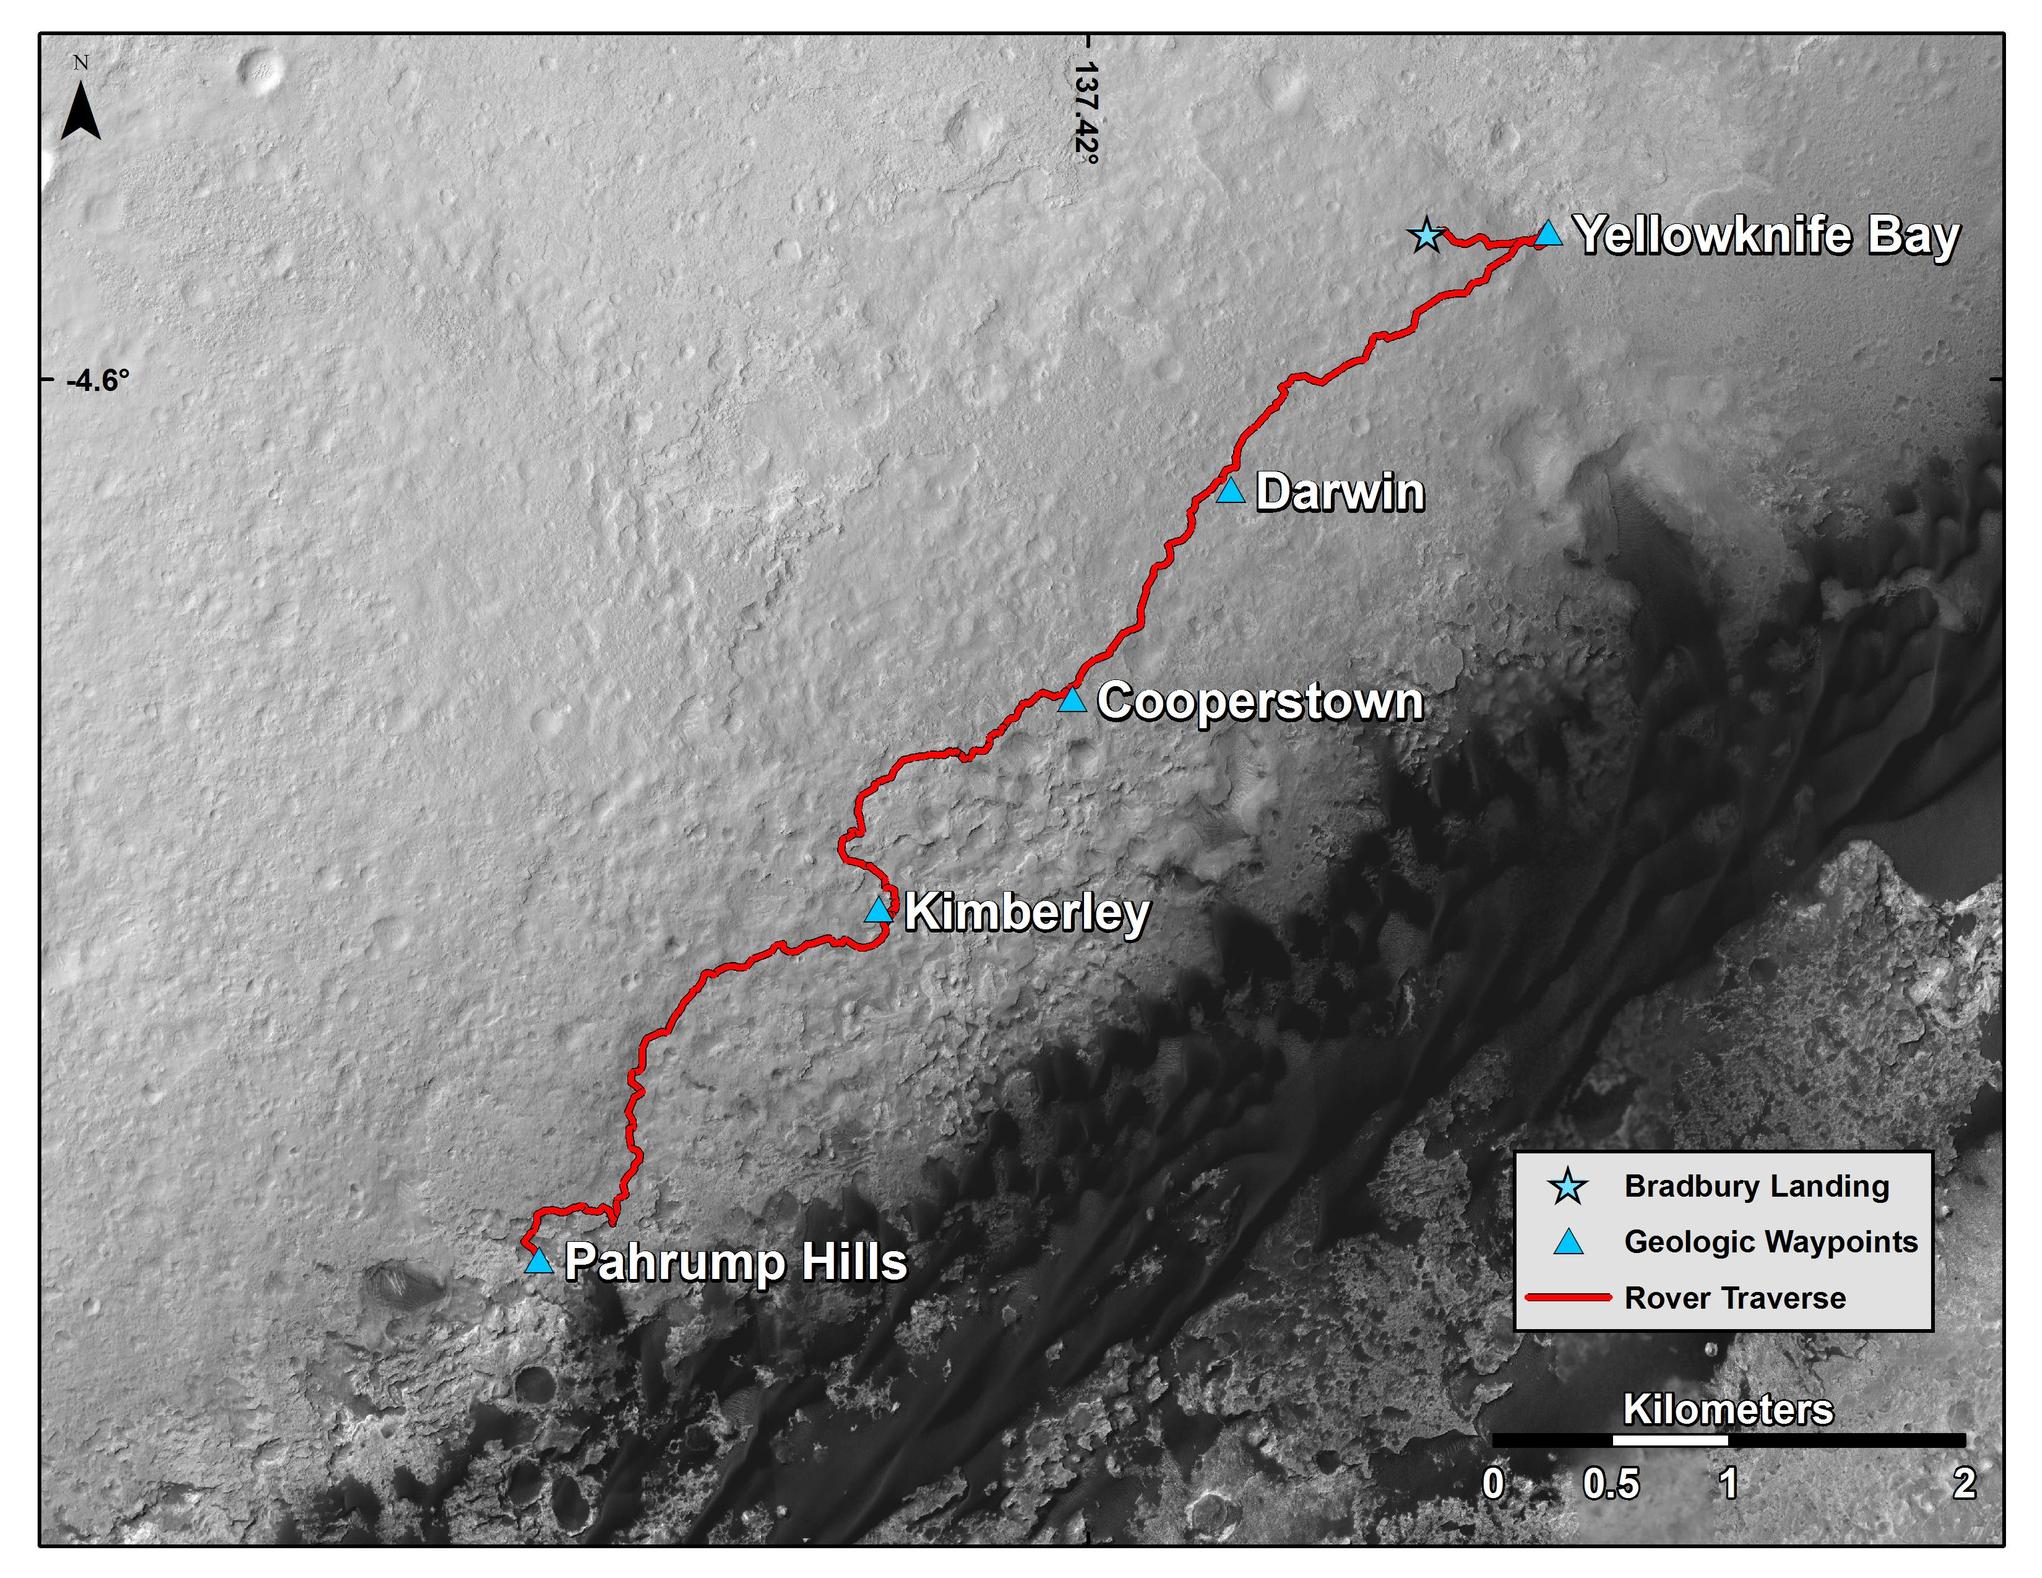 This map shows the route driven by NASA's Curiosity Mars rover from the location where it landed in August 2012 to the "Pahrump Hills" outcrop at the base of Mount Sharp.